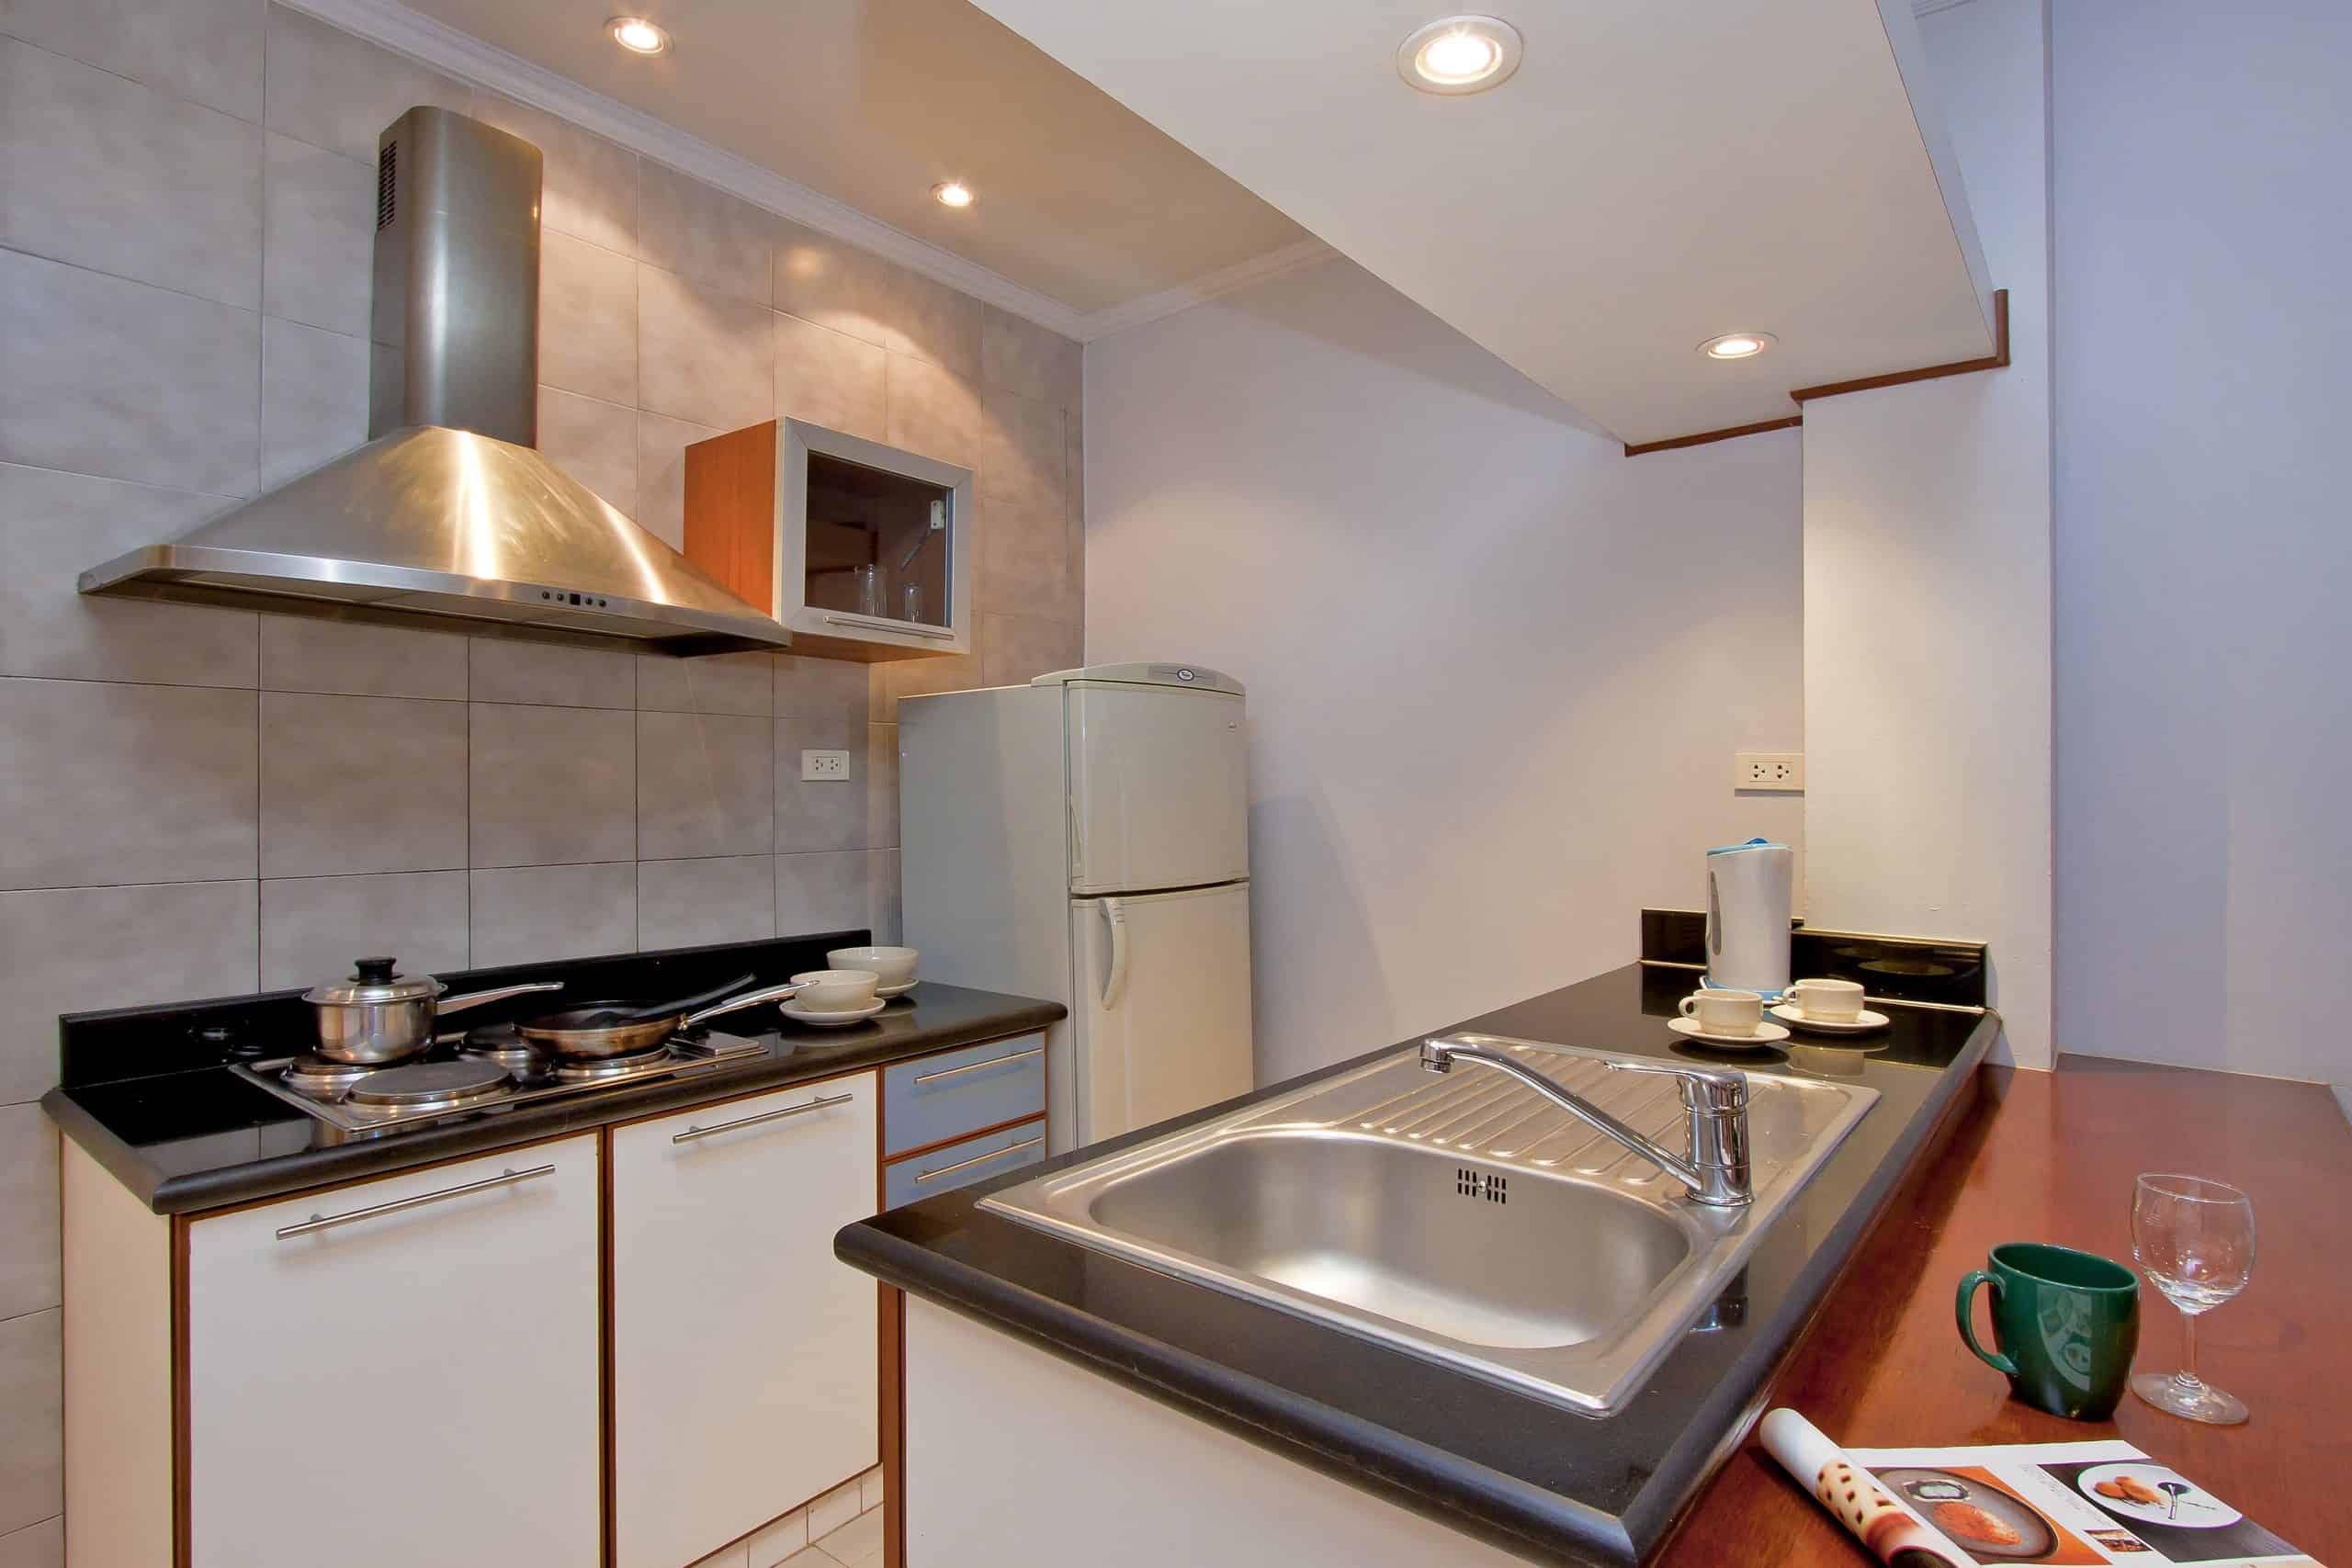 Well-equipped and functional Studio 10 kitchenette at Argyle Apartments in Pattaya, featuring a microwave and hot plate, cookware, dishes, utensils, and a small dining table with chairs